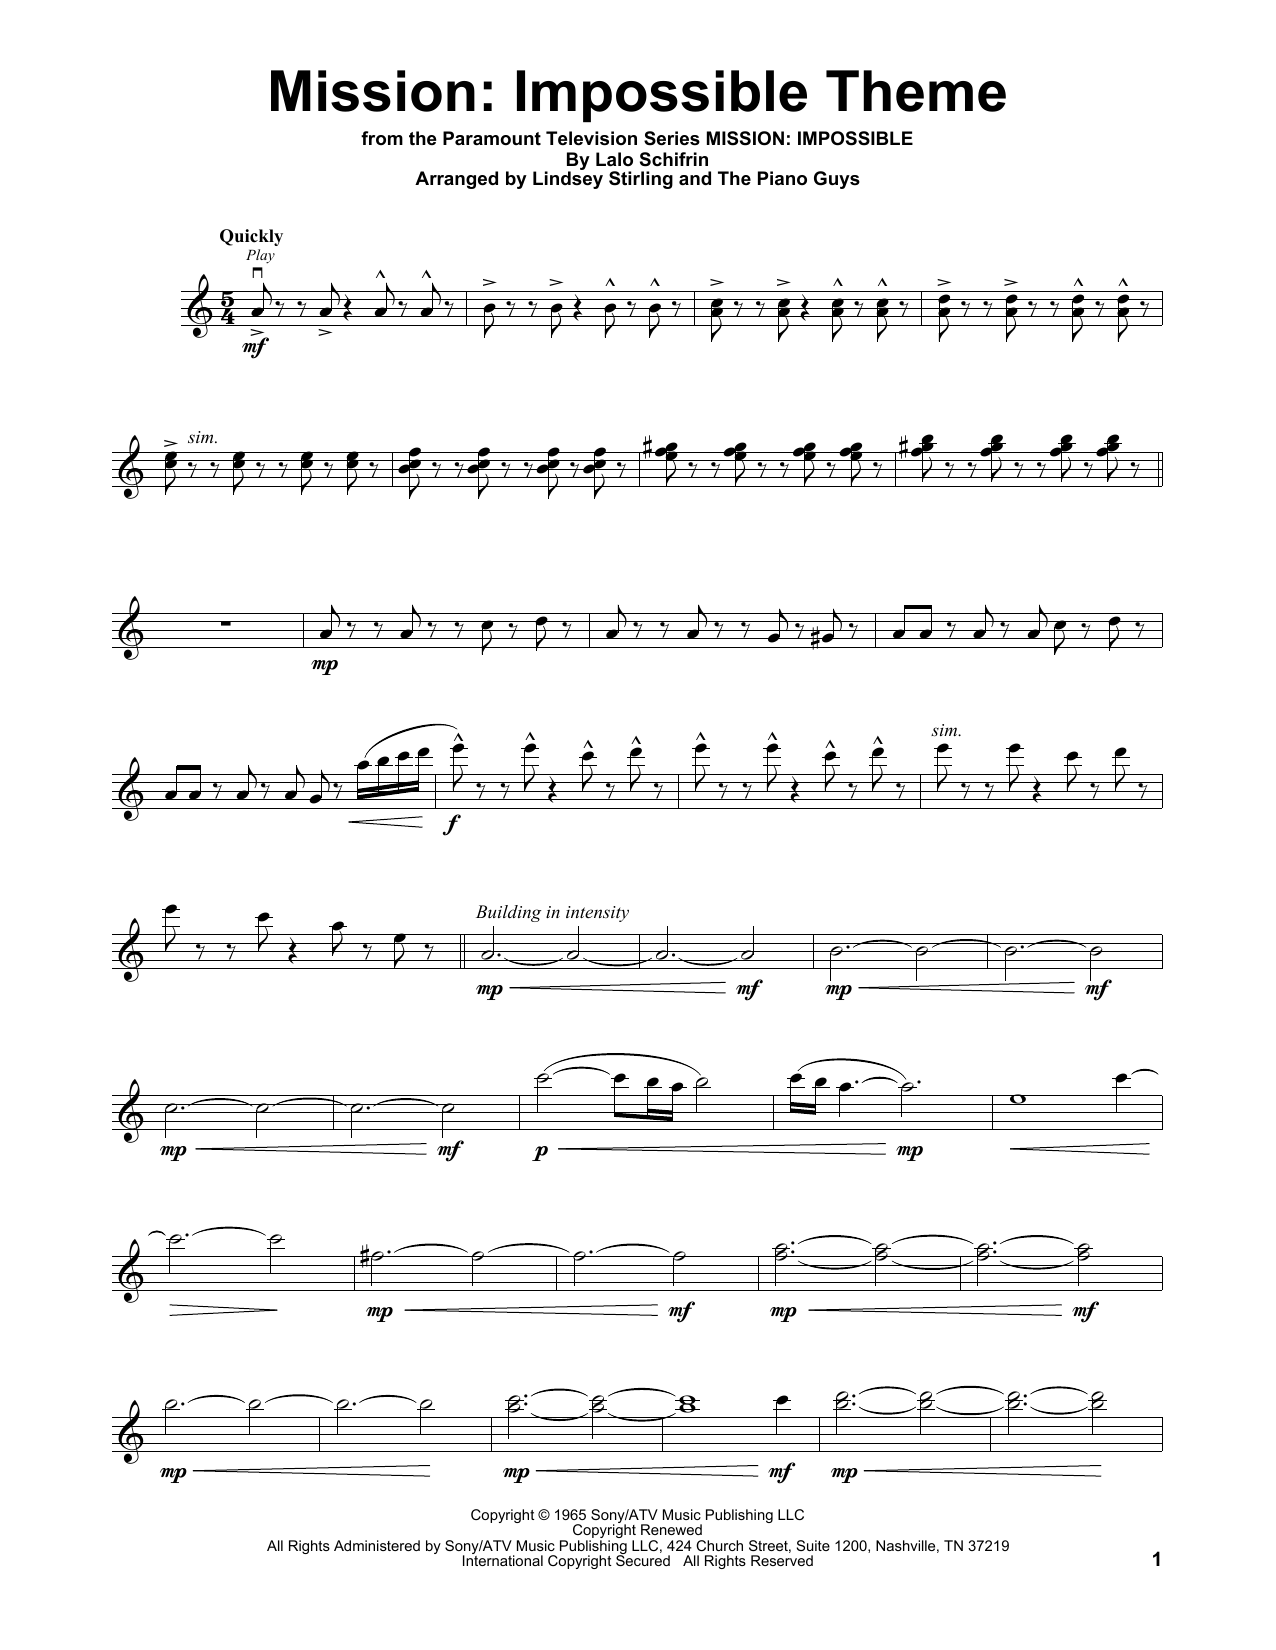 Download Lindsey Stirling Mission: Impossible Theme Sheet Music